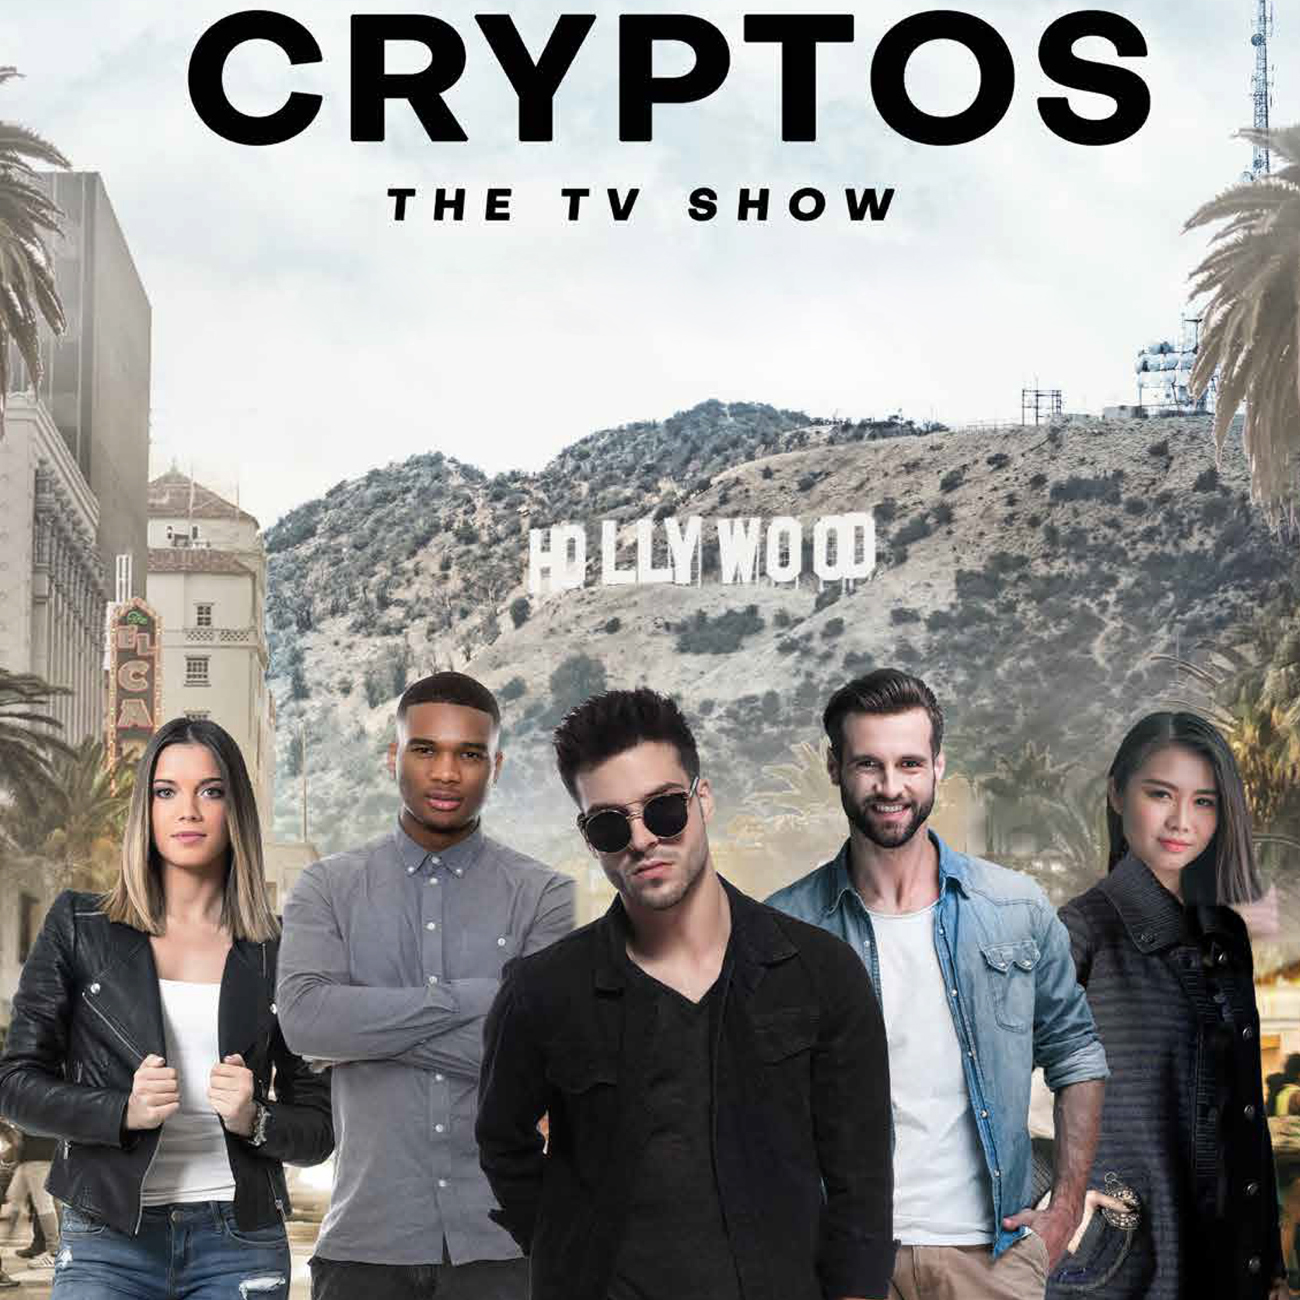 Hollywood Actor Kevin Connolly Directs a New Television Pilot Called 'Cryptos'